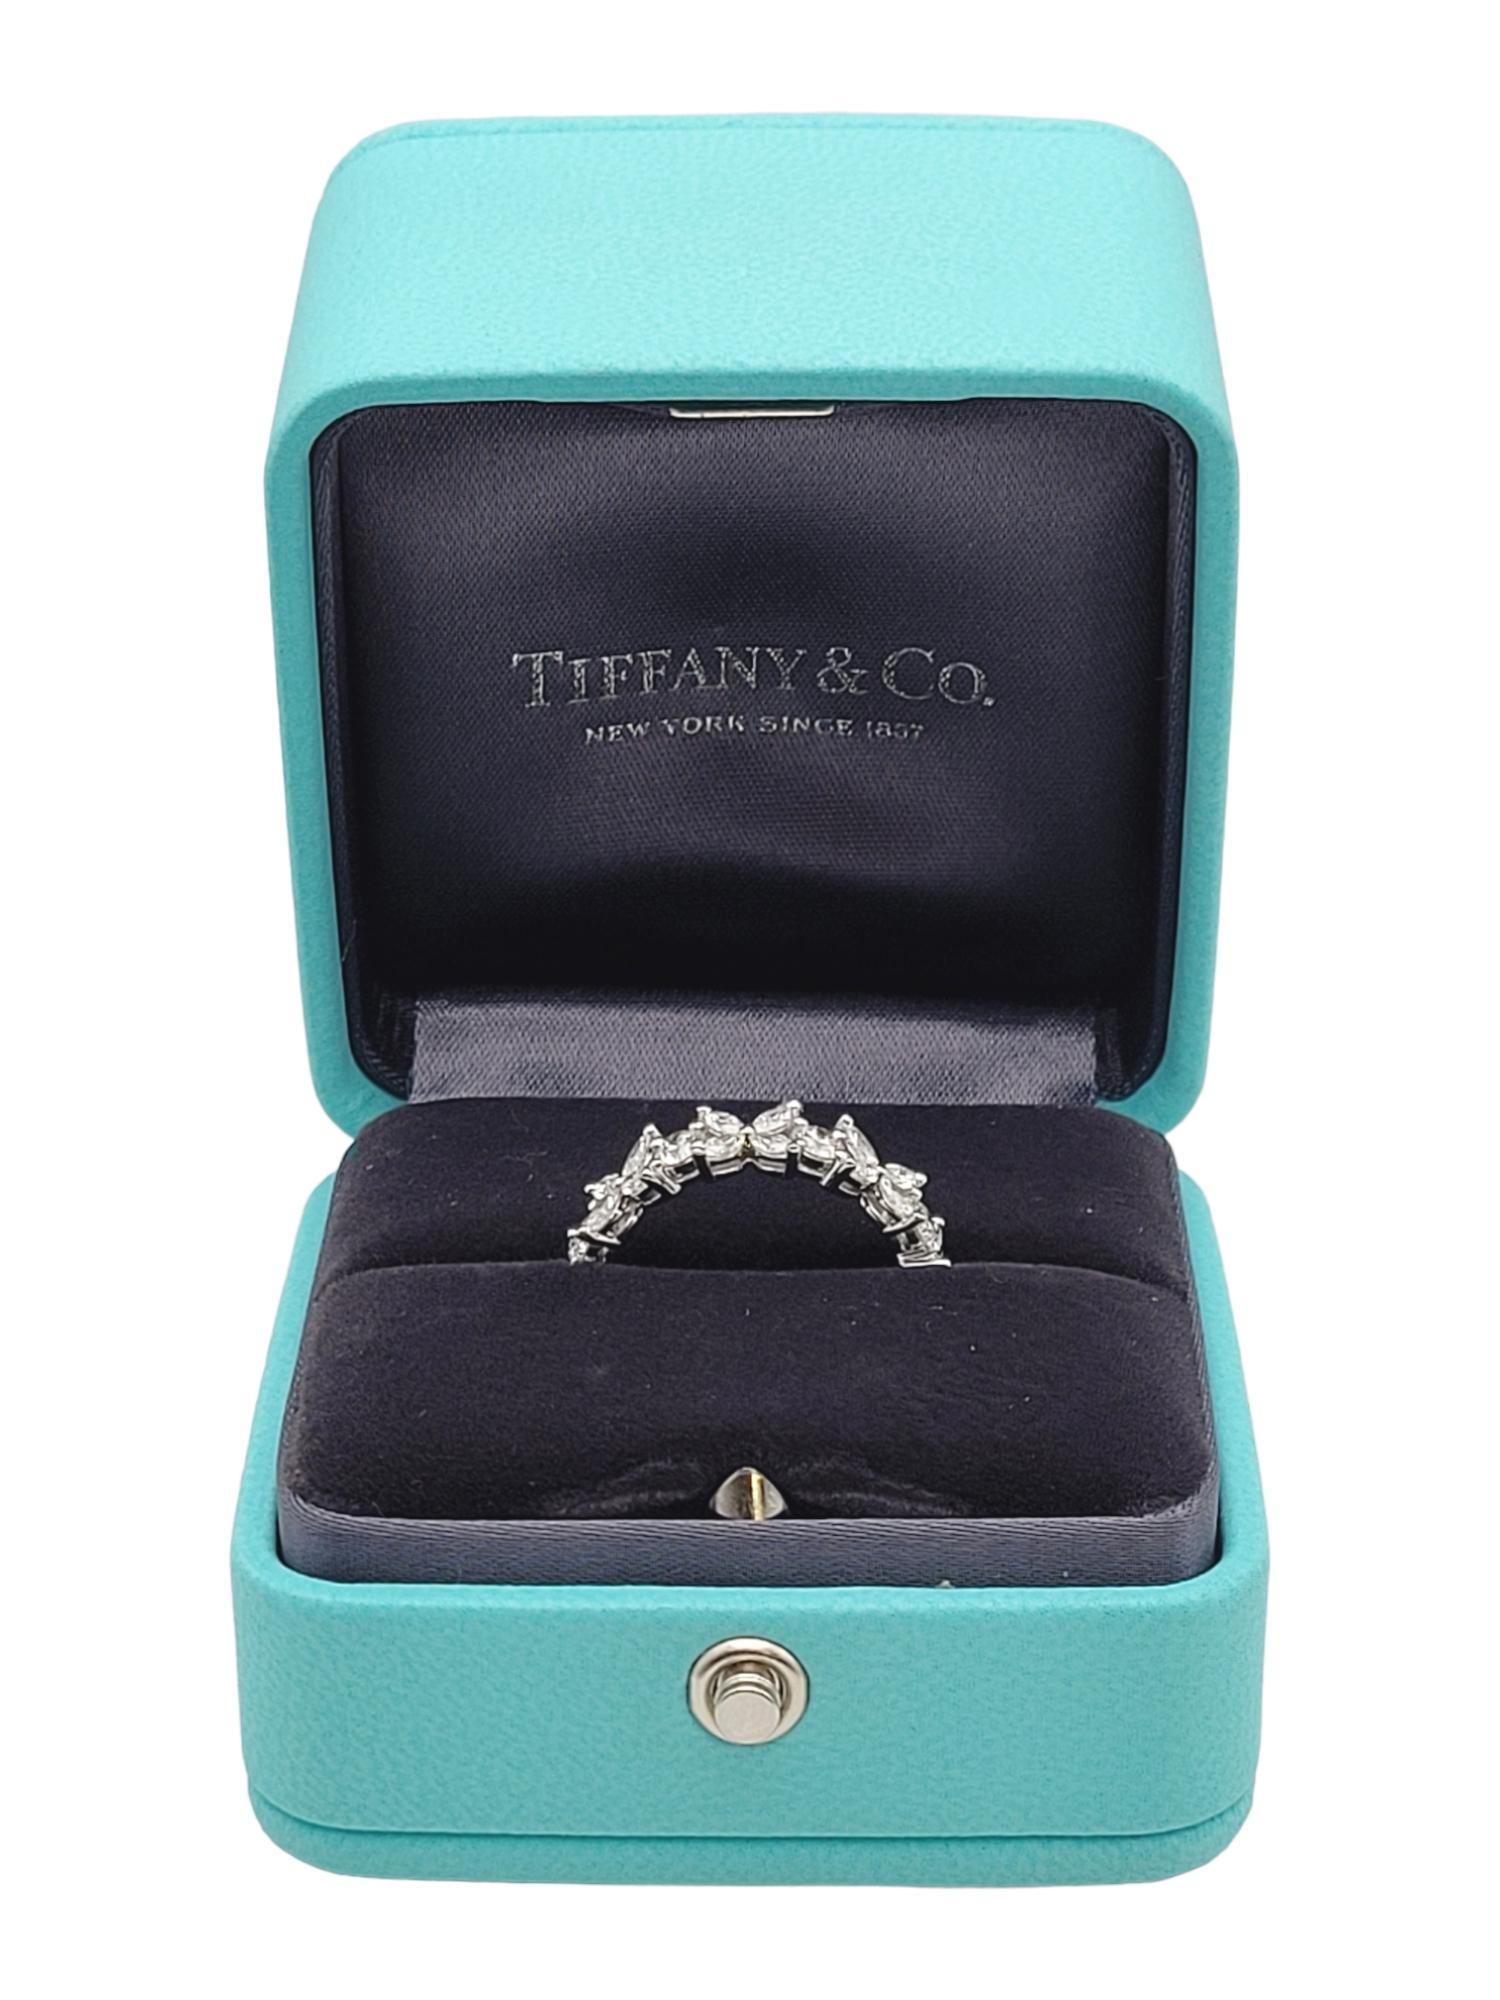 Tiffany & Co. Victoria Alternating 2.27 Carats Diamond Ring in Platinum For Sale 3